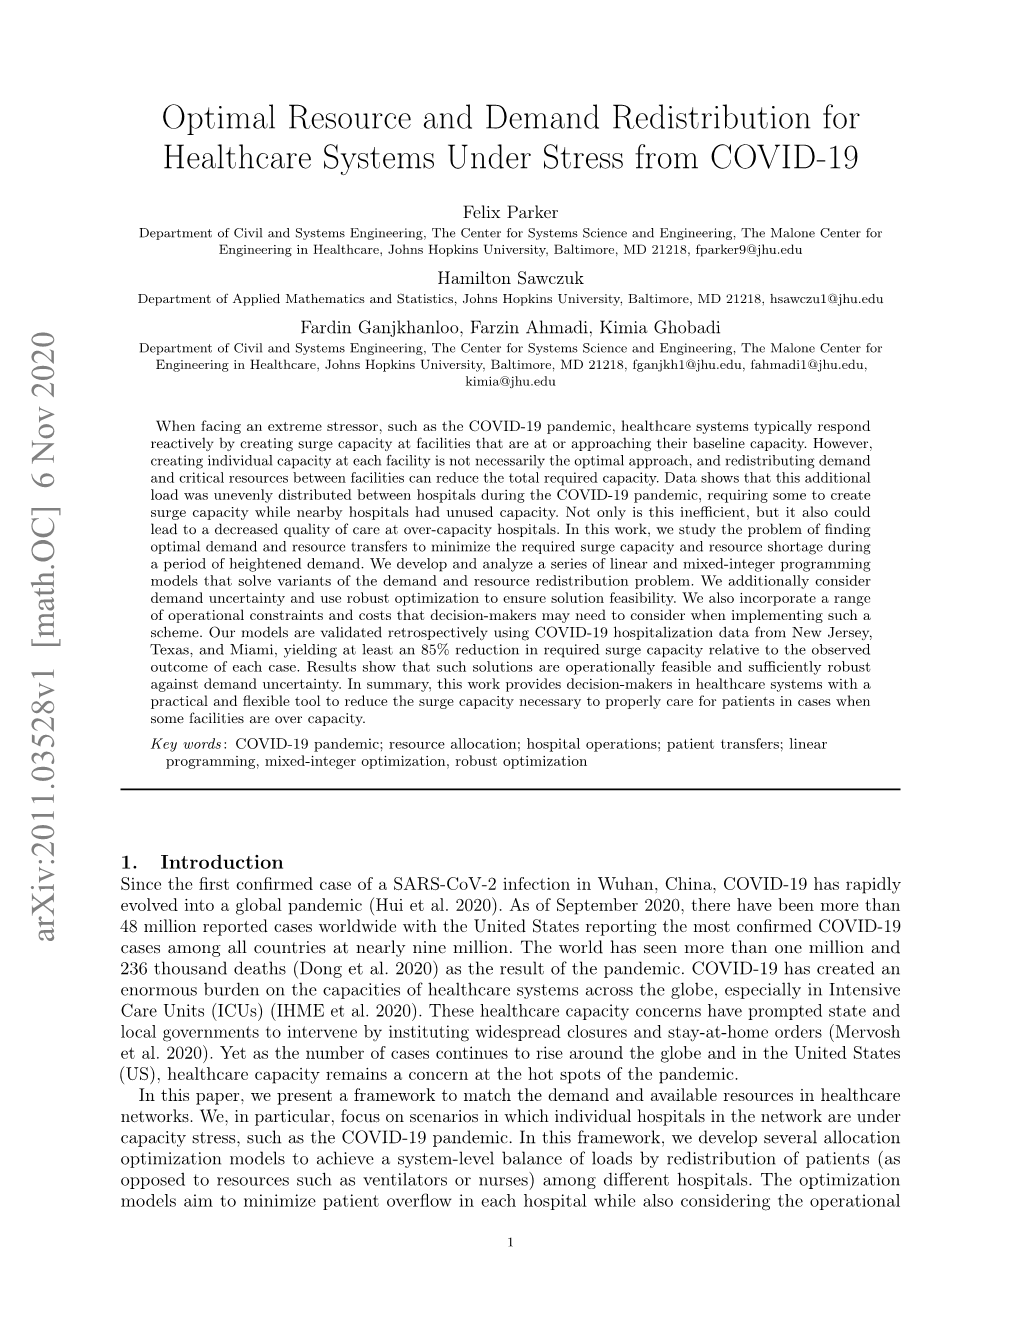 Optimal Resource and Demand Redistribution for Healthcare Systems Under Stress from COVID-19 Arxiv:2011.03528V1 [Math.OC] 6 No